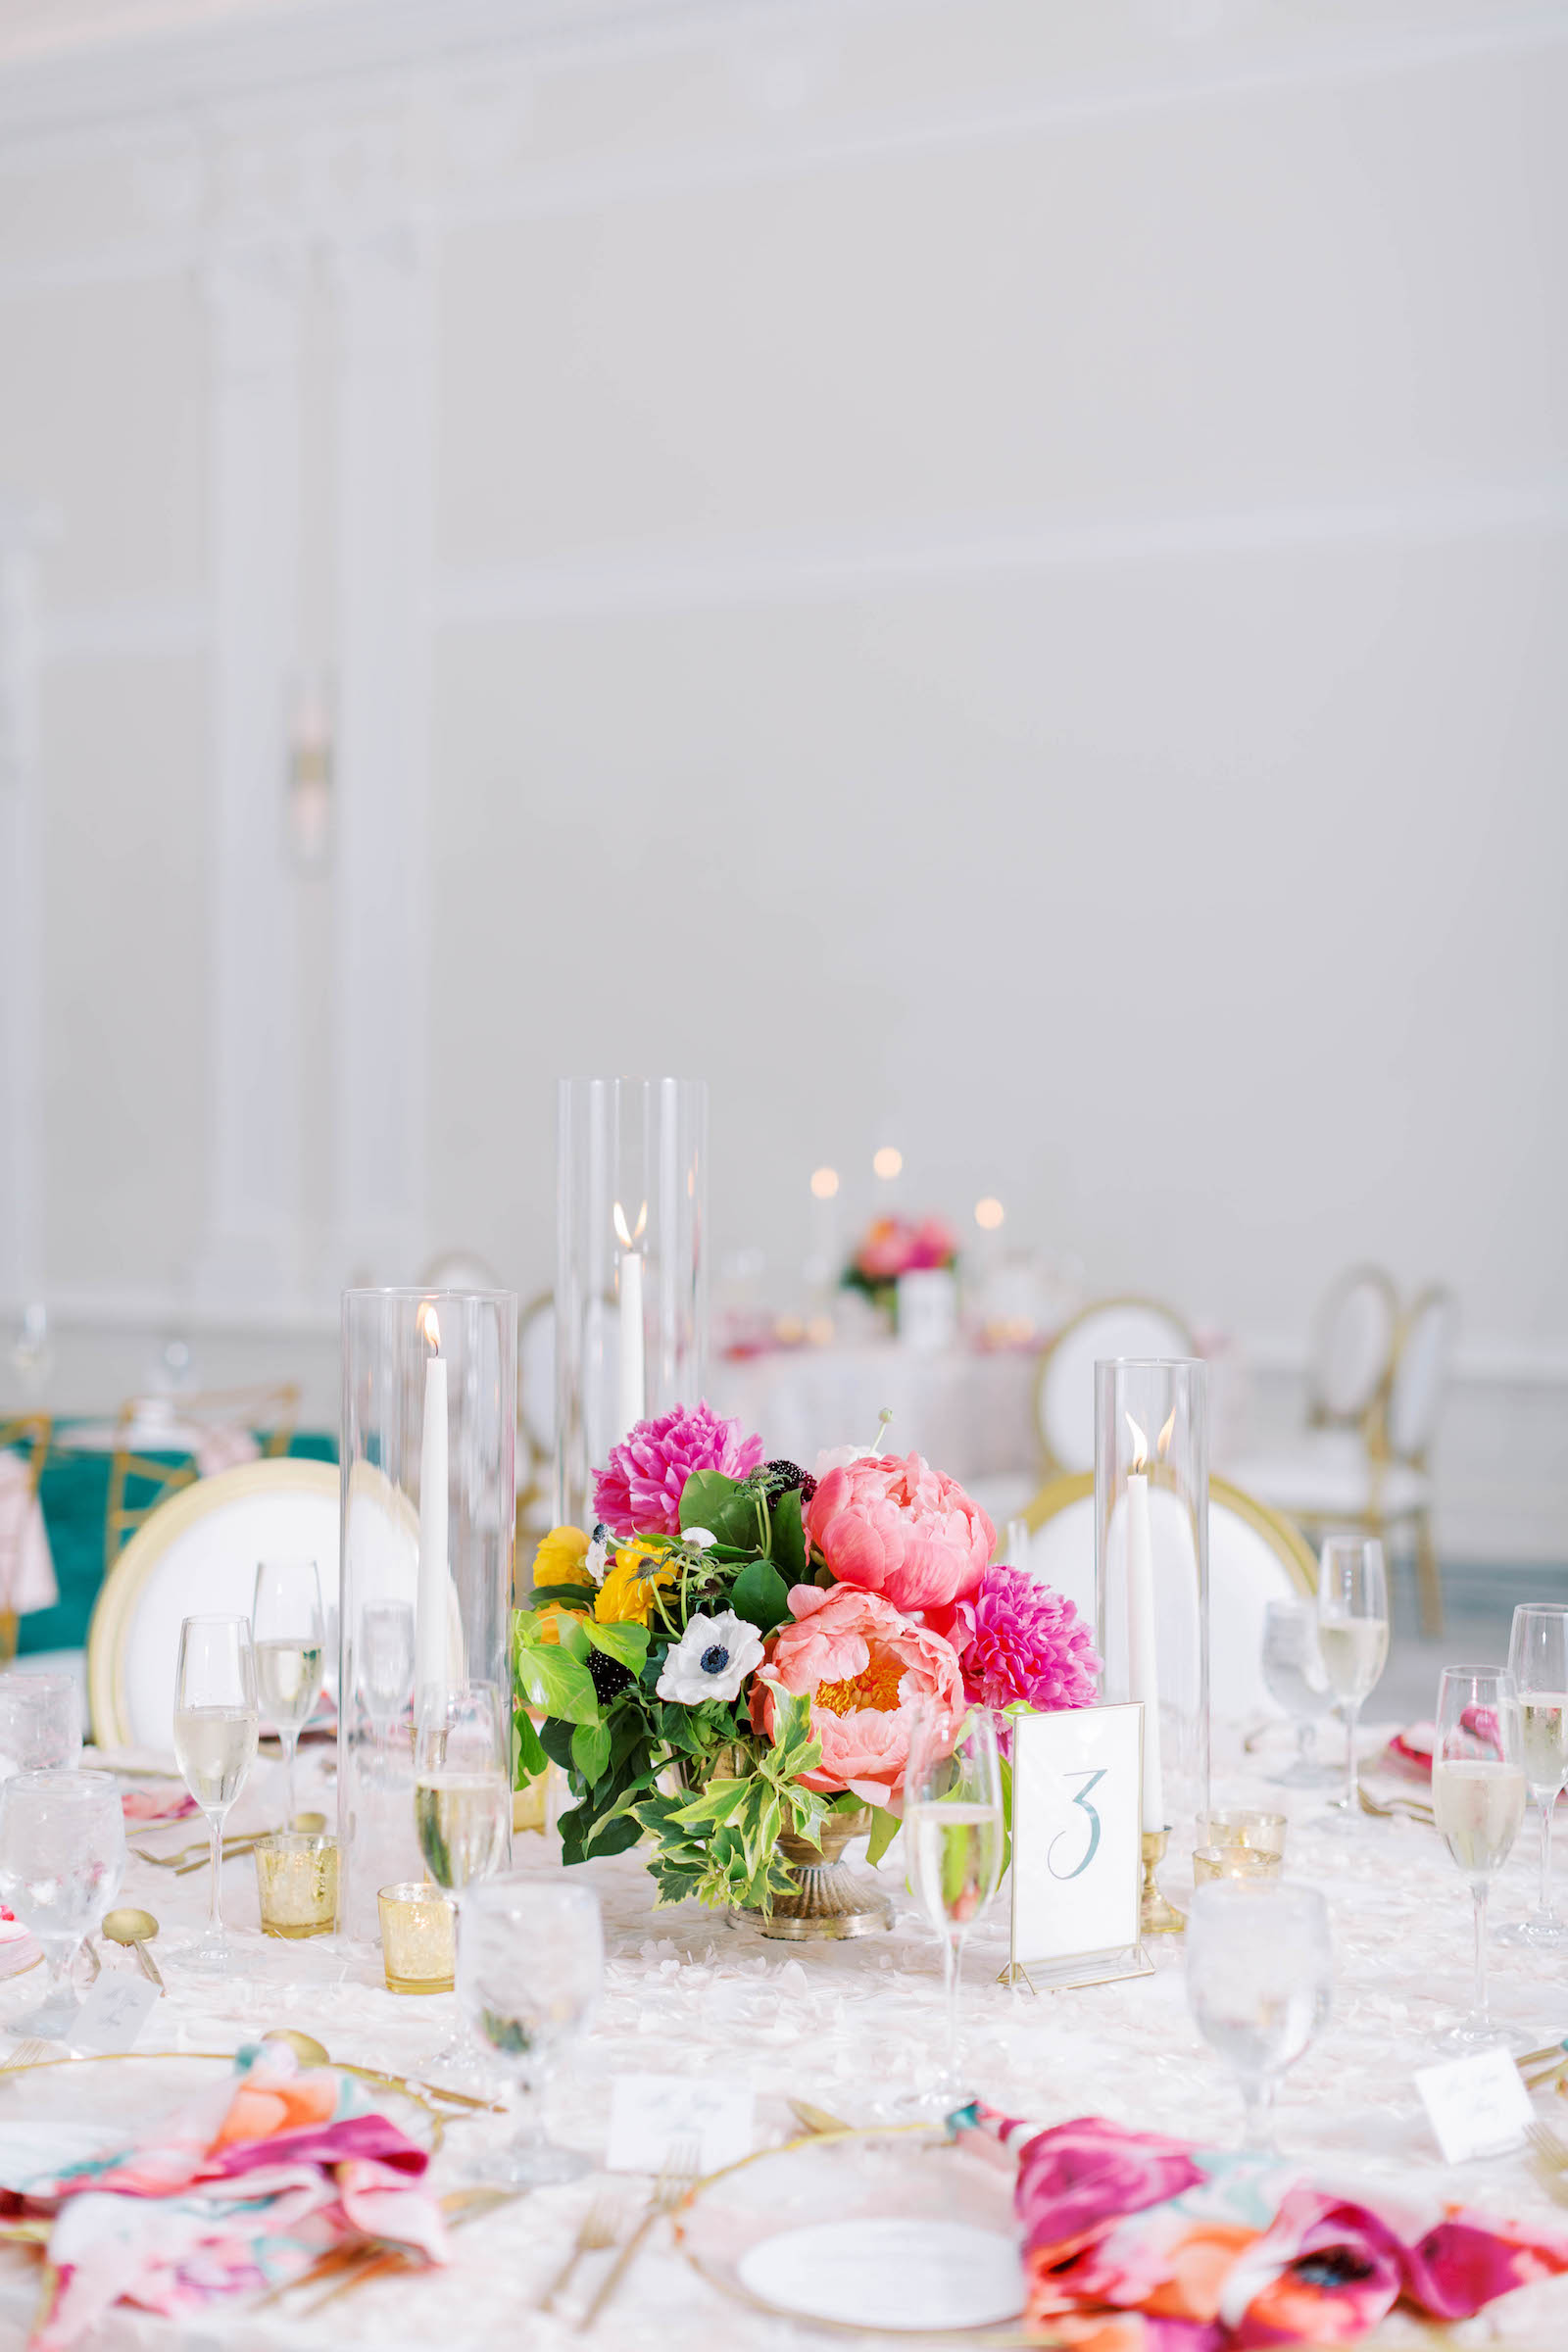 White and Gold Chairs at Wedding Reception with Hot Pink Accents | Tropical Details and Long White Candlesticks with Gold Candle Holders | Floral Pink Centerpieces